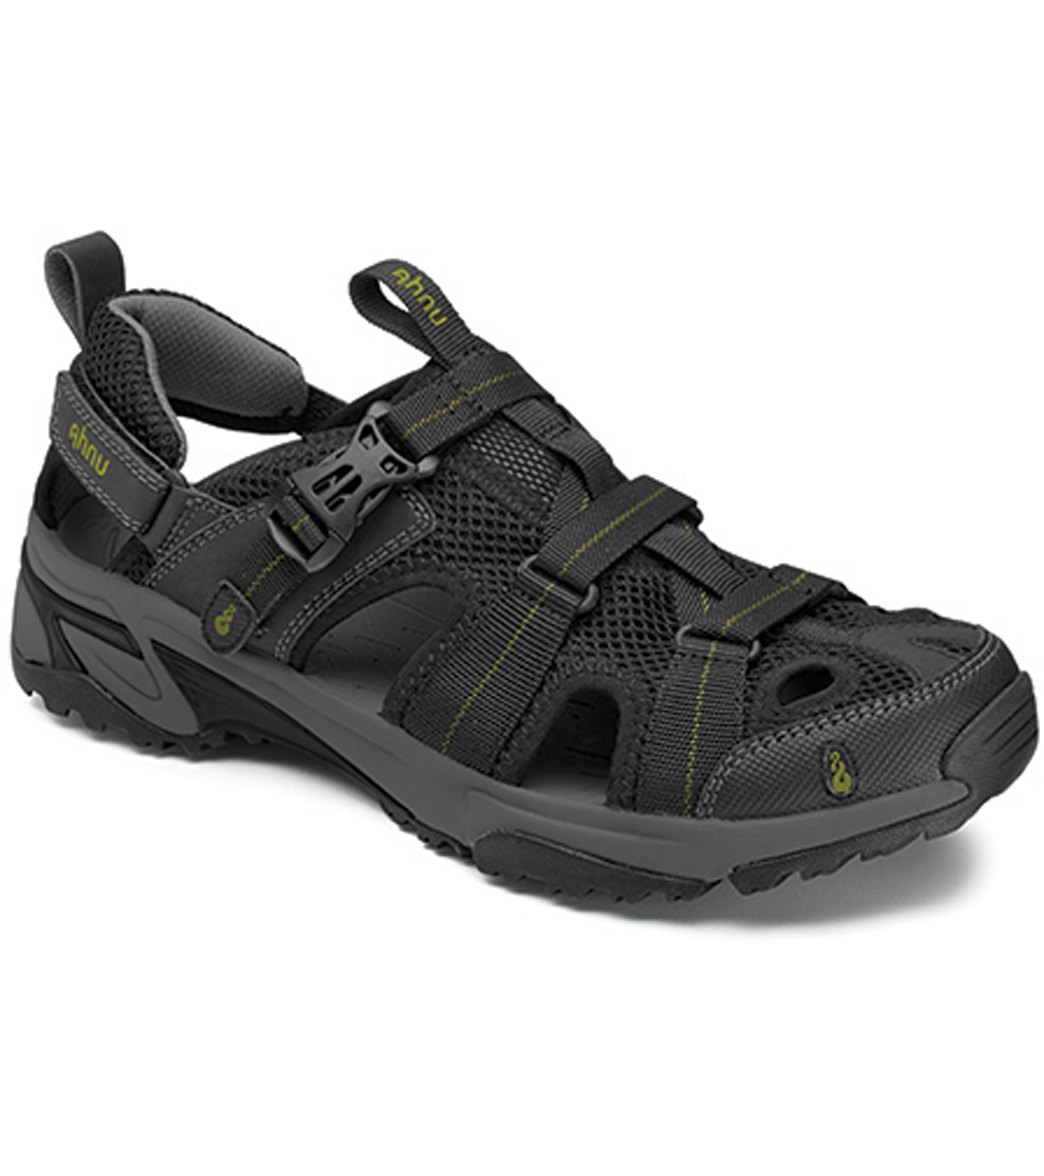 Ahnu Men's Del Rey Water Shoes at SwimOutlet.com - Free Shipping